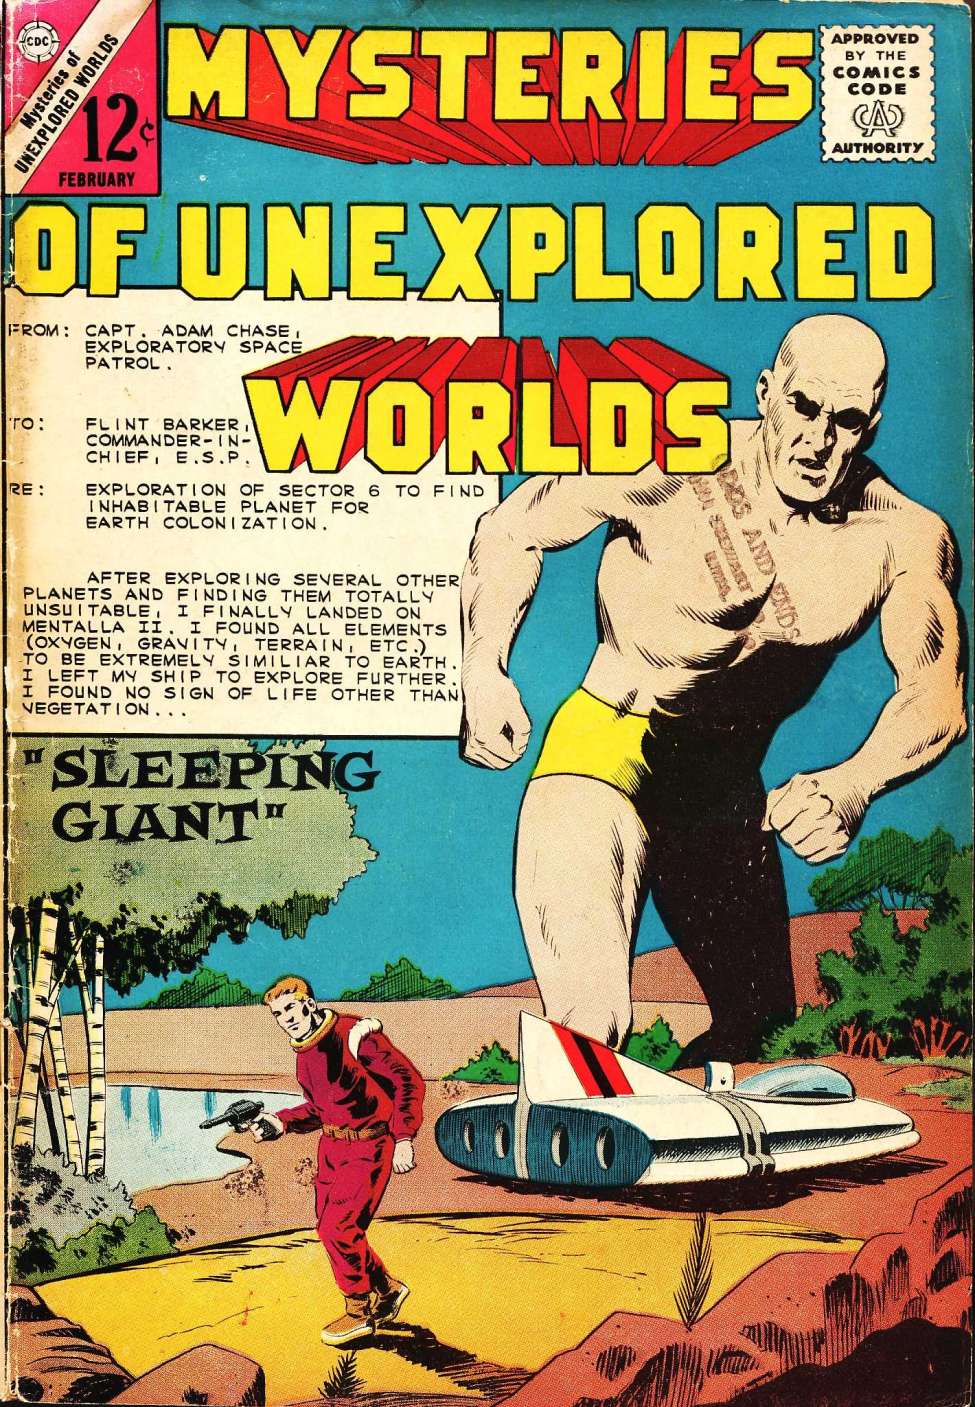 Book Cover For Mysteries of Unexplored Worlds 40